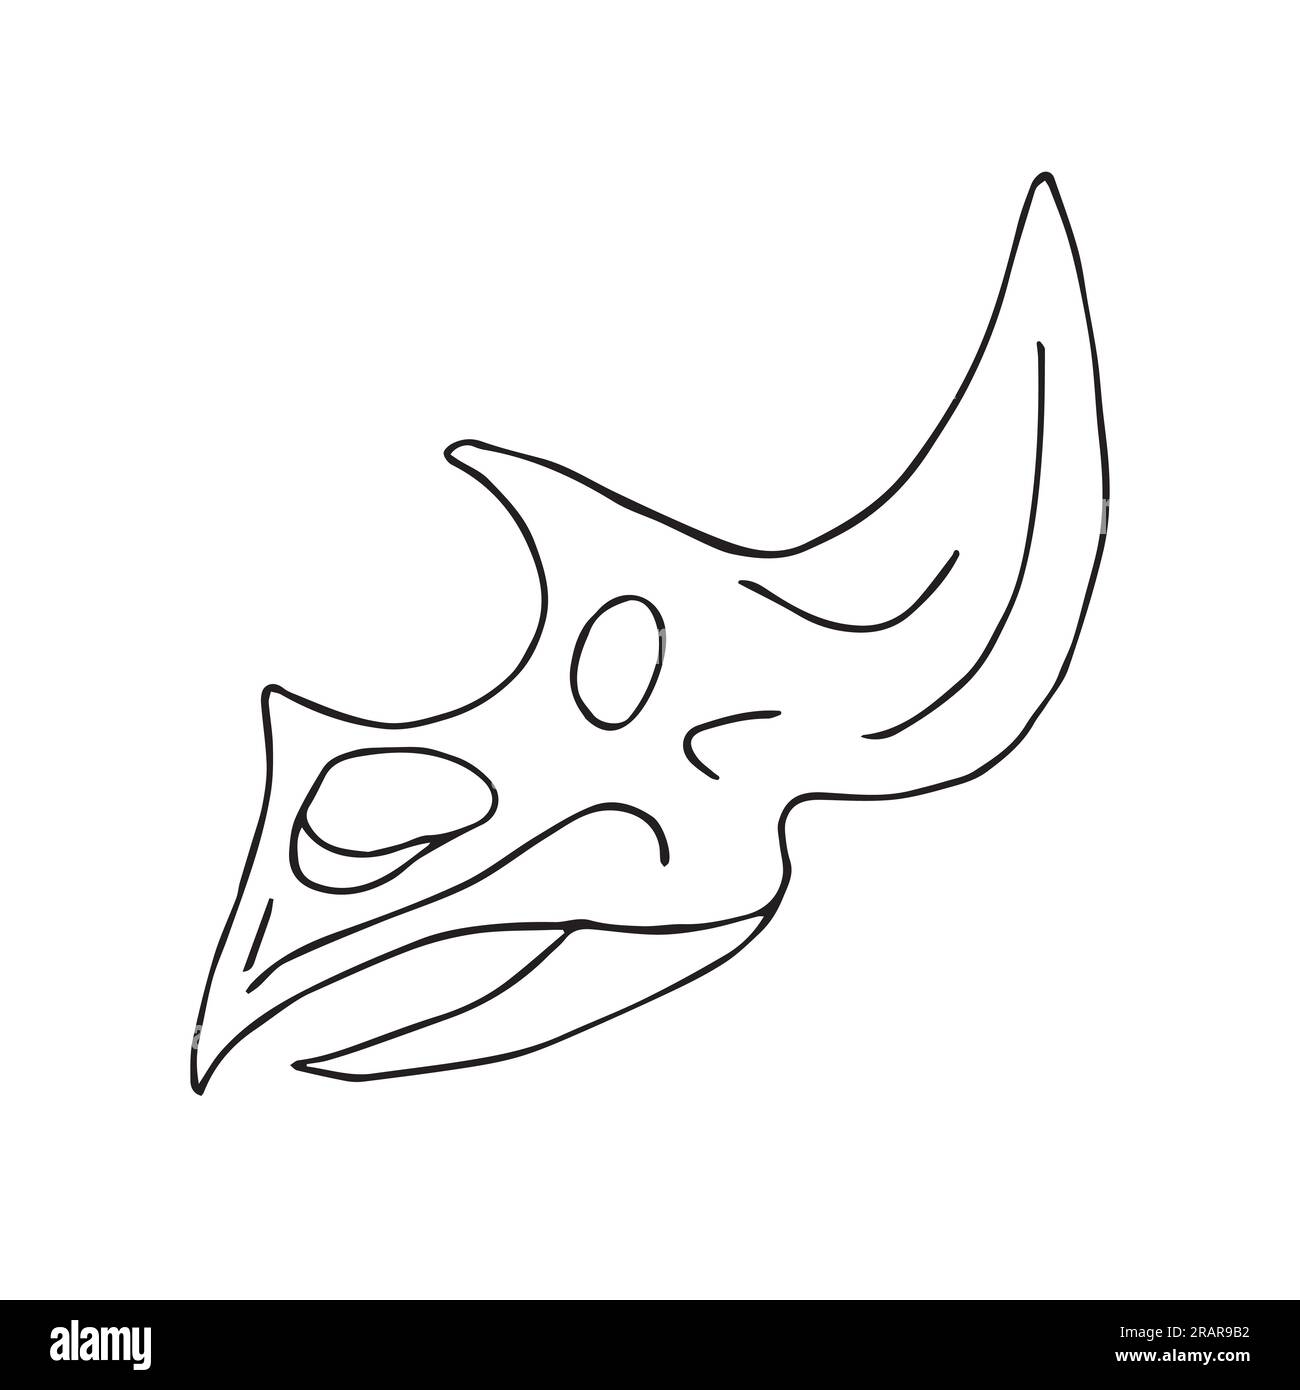 Vector hand drawn sketch triceratops dinosaur skull isolated on white background Stock Vector